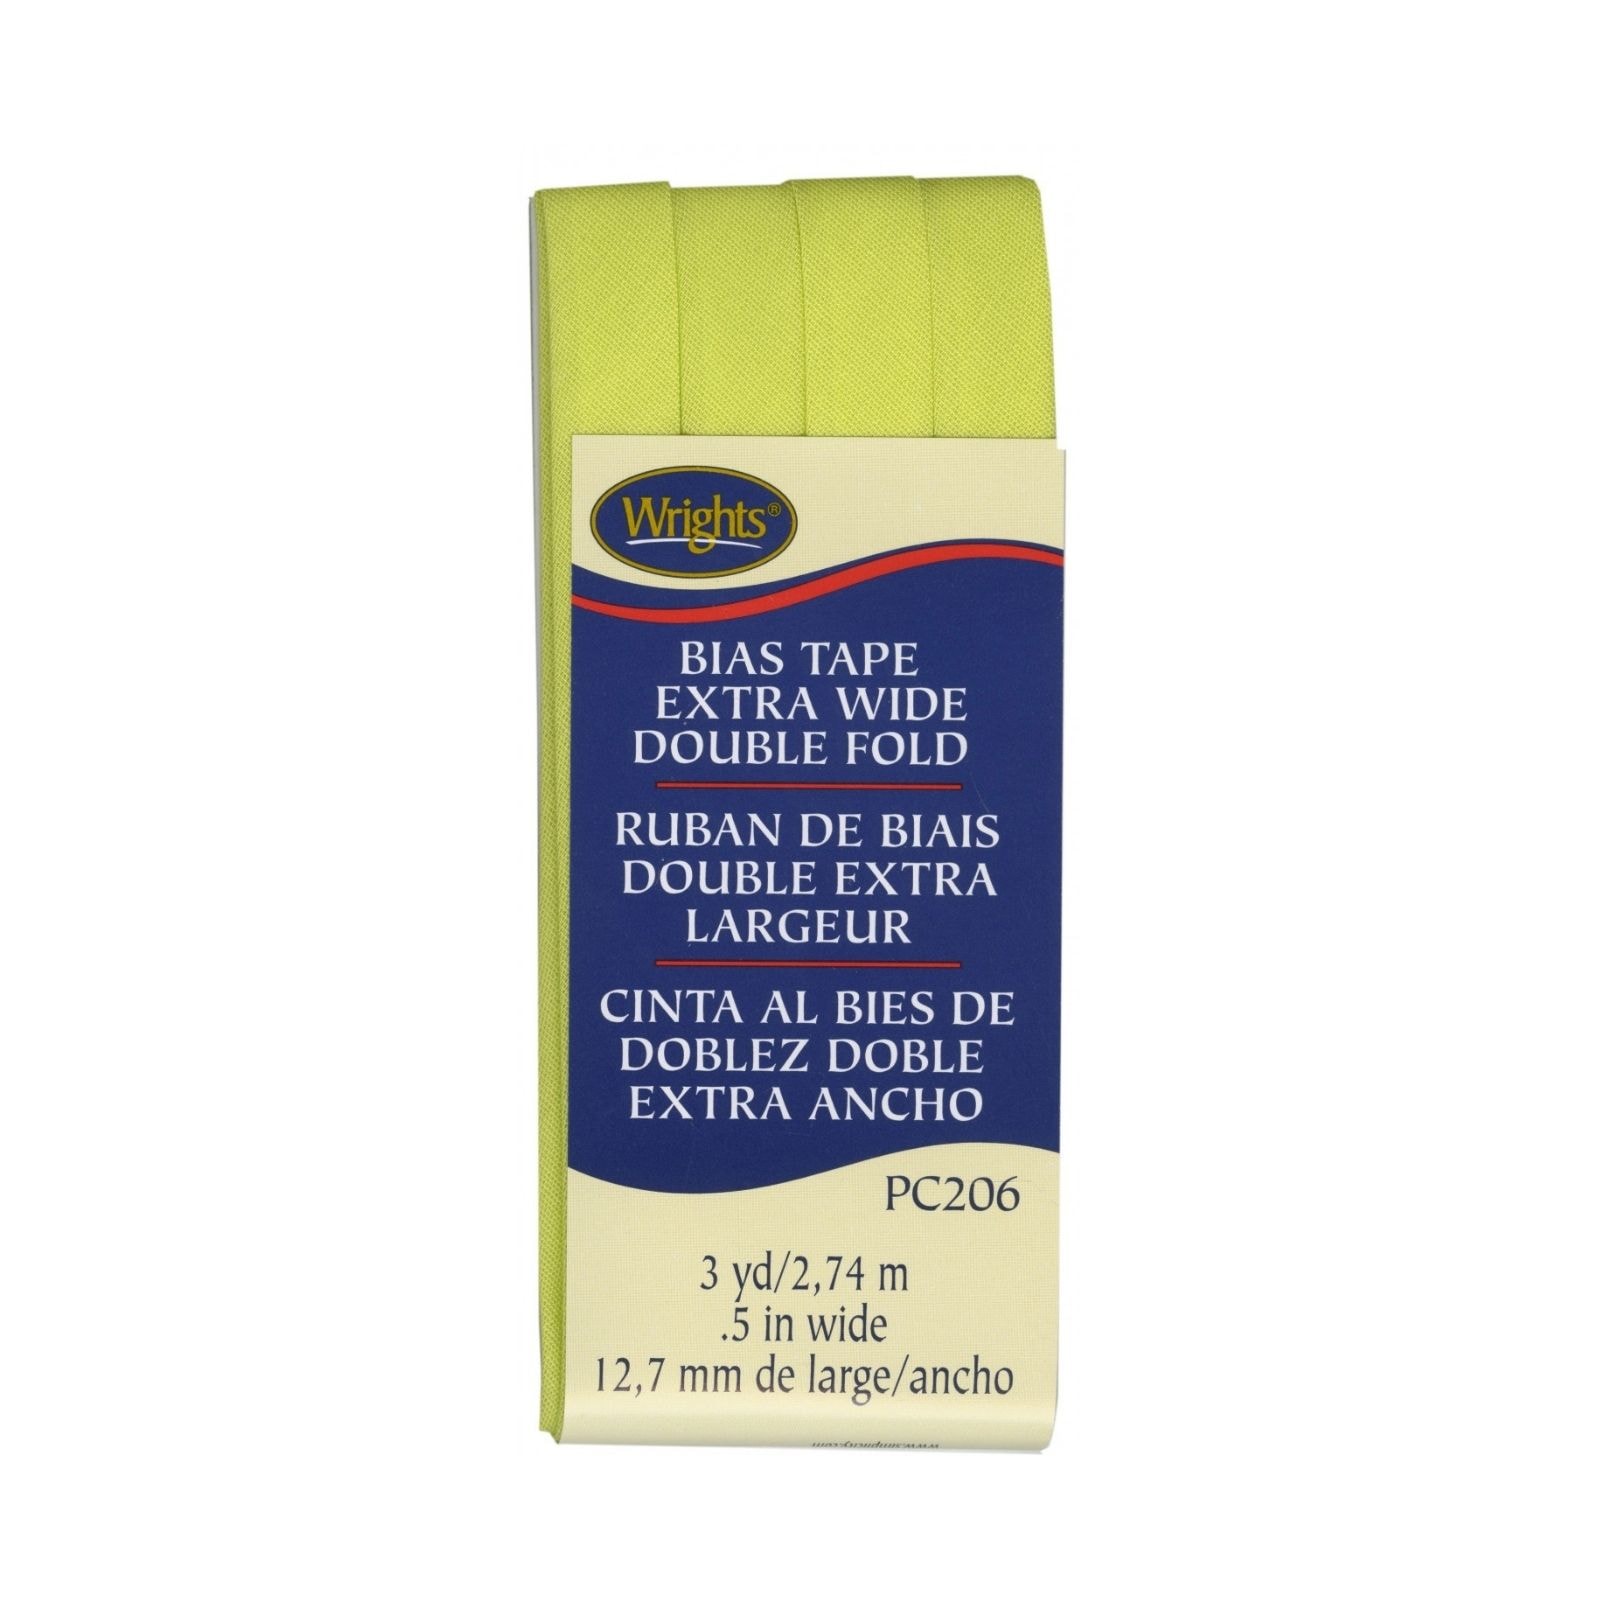 Wrights Extra Wide Double Fold Bias Tape - Citron